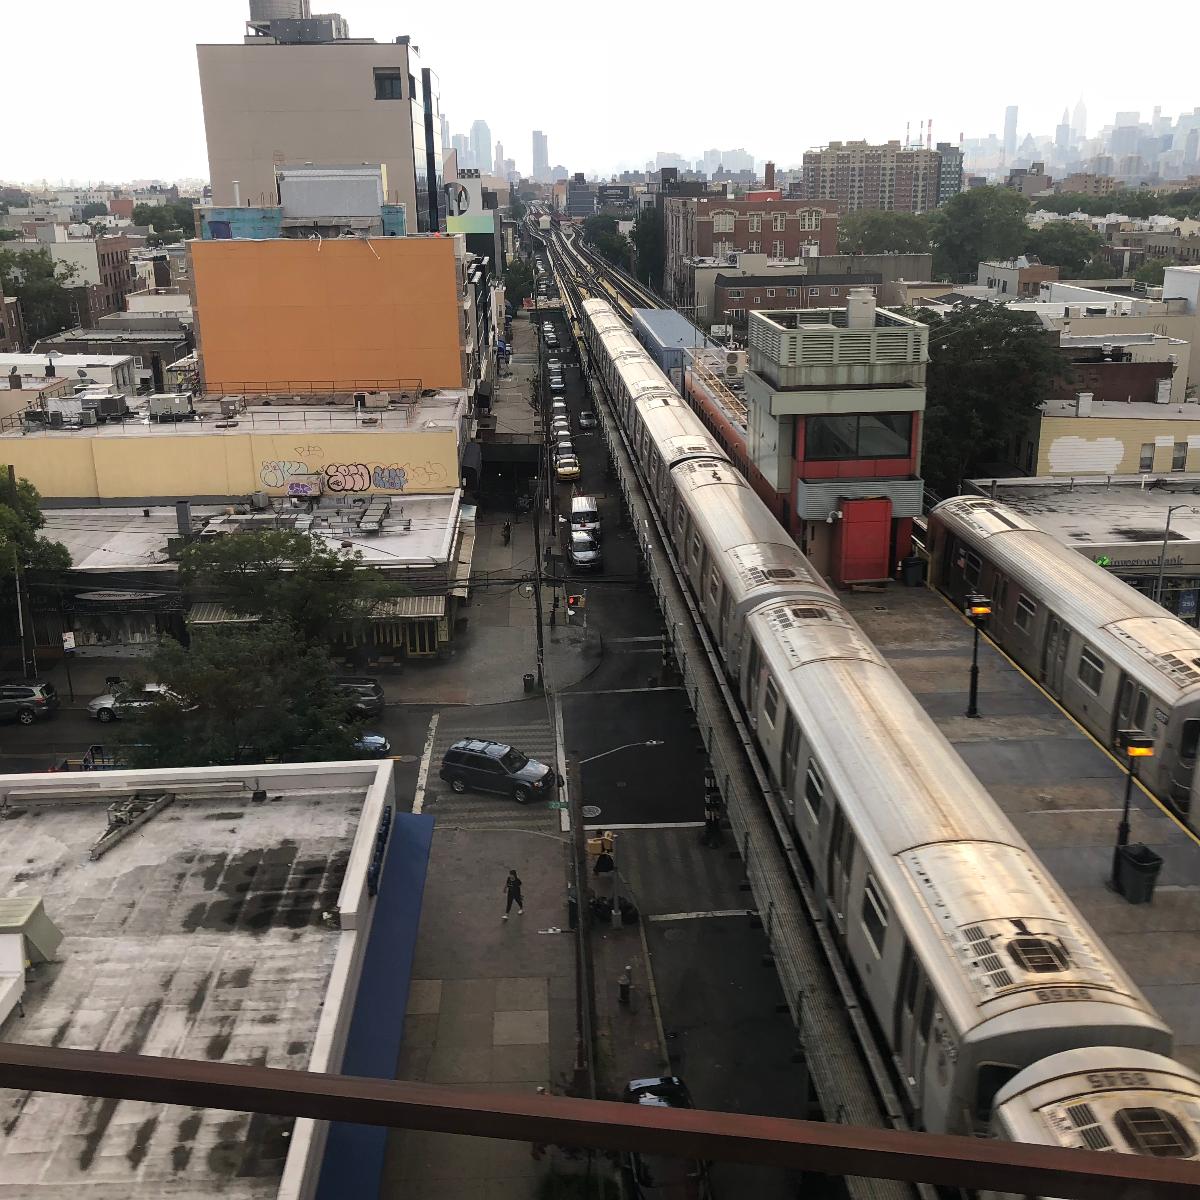 South end of the Astoria–Ditmars Boulevard (BMT Astoria Line) station from above Taken from Amtrak train 2165 on the New York Connecting Railroad viaduct in Queens, New York.